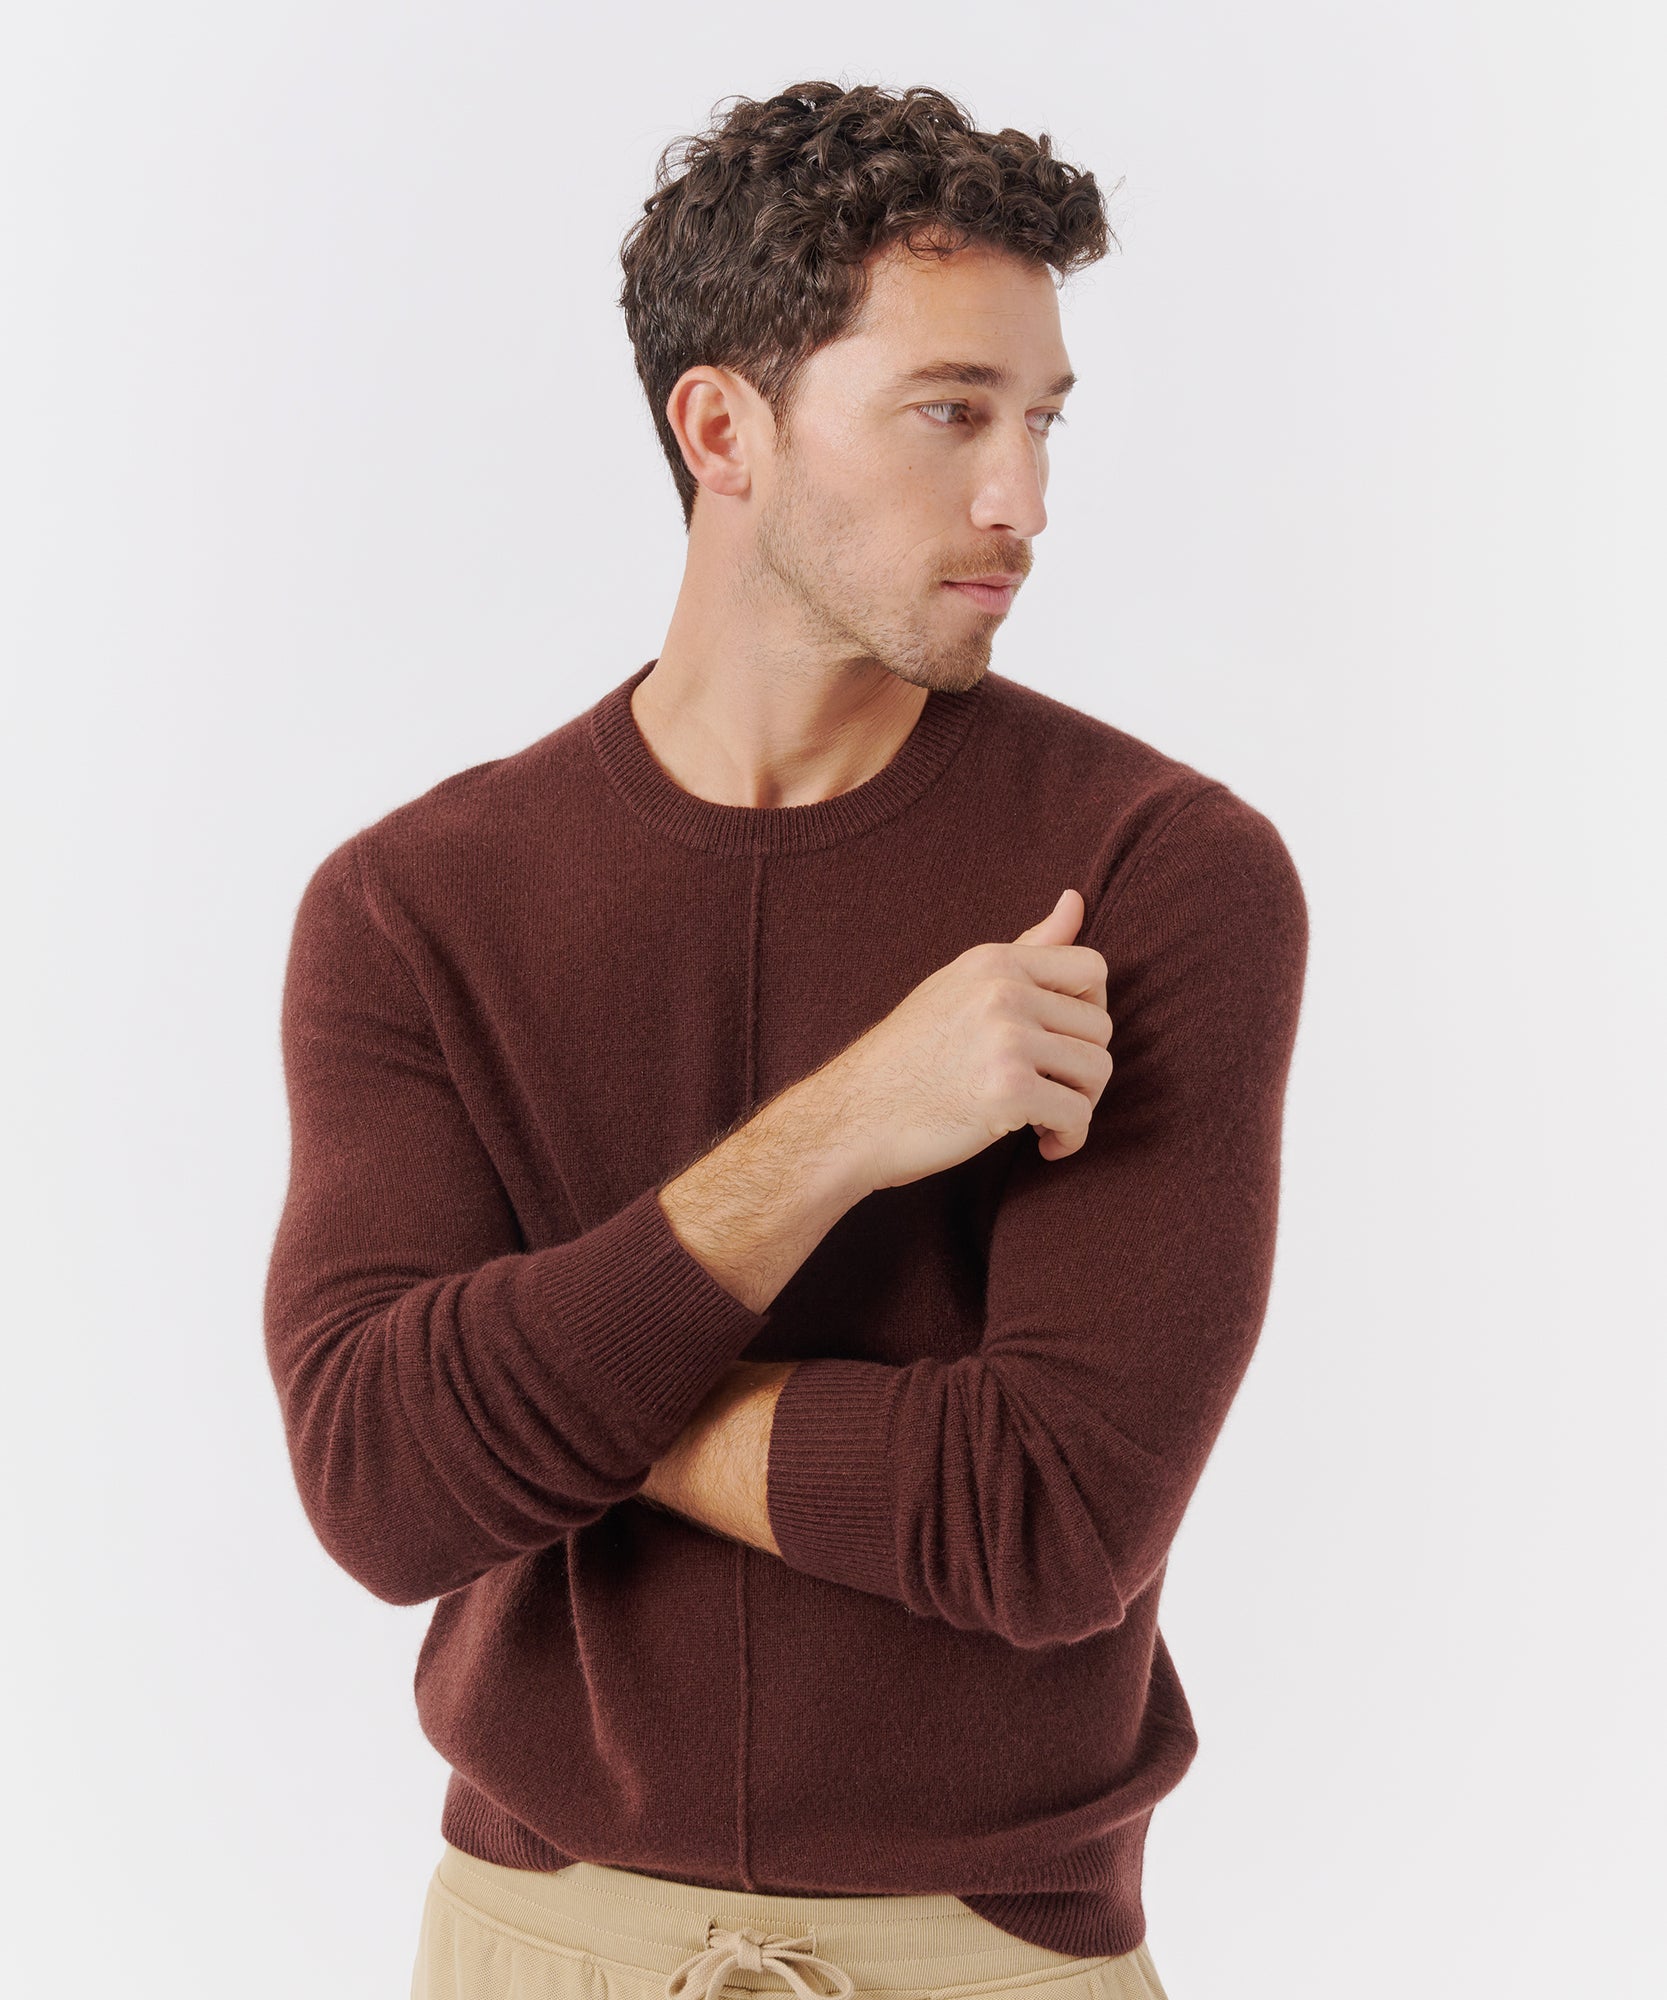 ATM Anthony Thomas Melillo Men's Recycled Cashmere Exposed Seam Crew Neck  Sweater - Chocolate